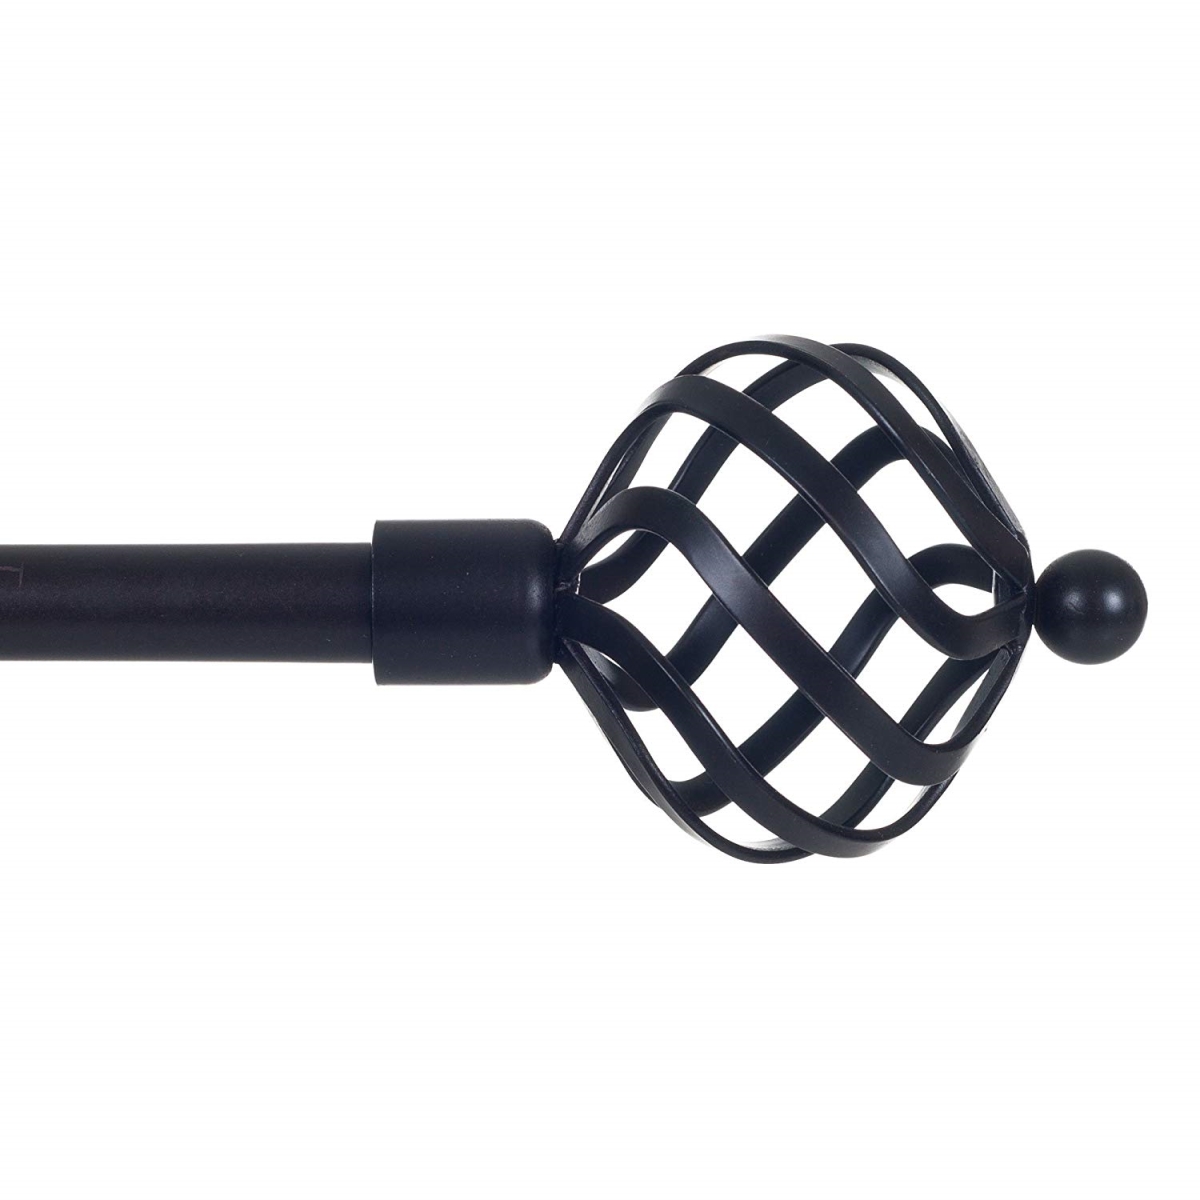 63a-19363 Twisted Sphere Curtain Rod For Window, Rubbed Bronze - 0.75 In.